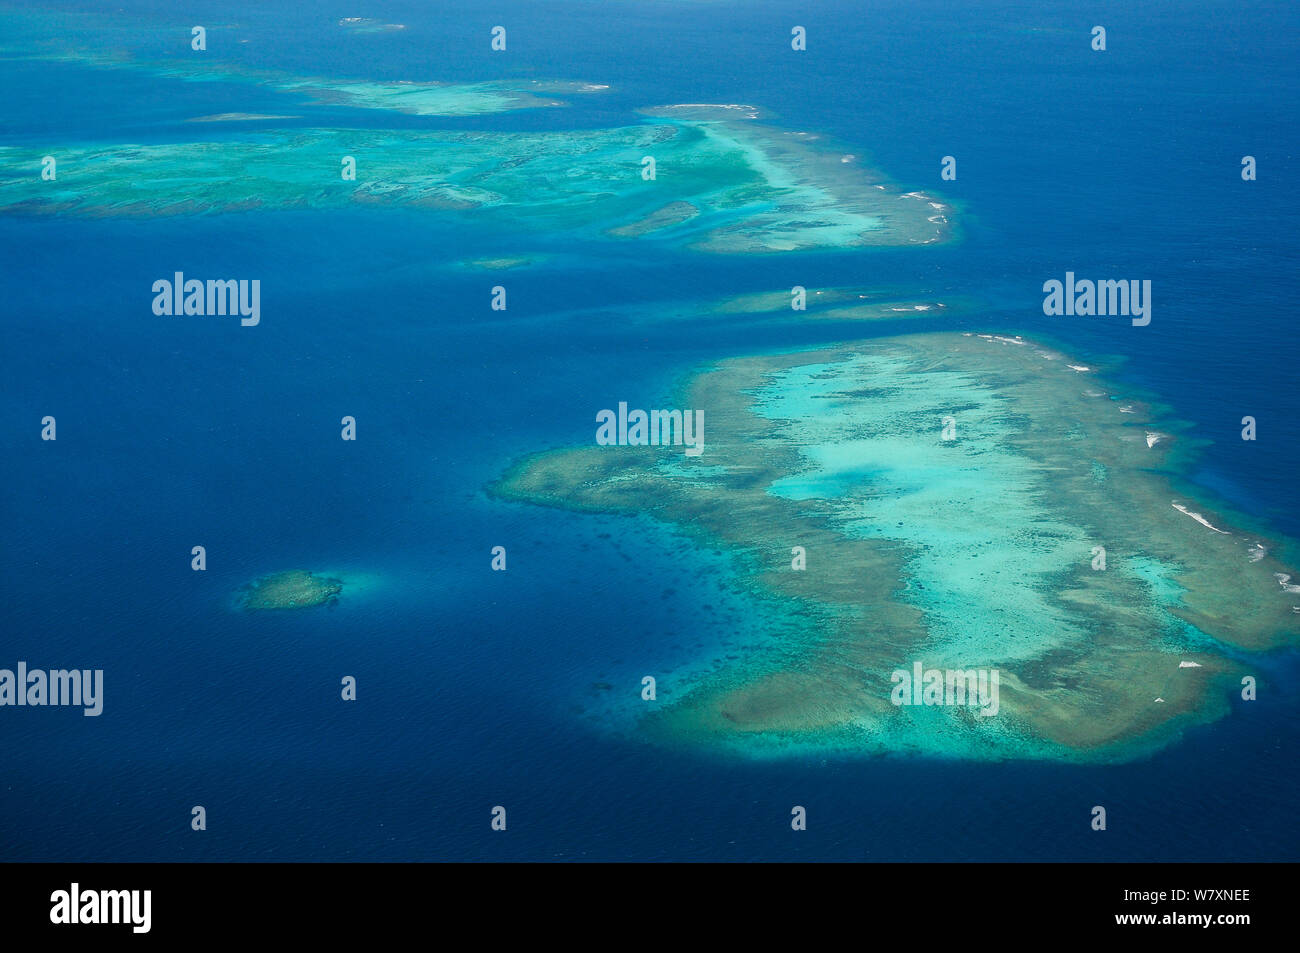 Aerial view of atolls with surrounding coral reefs, off the coast of New Caledonia, September 2008 Stock Photo